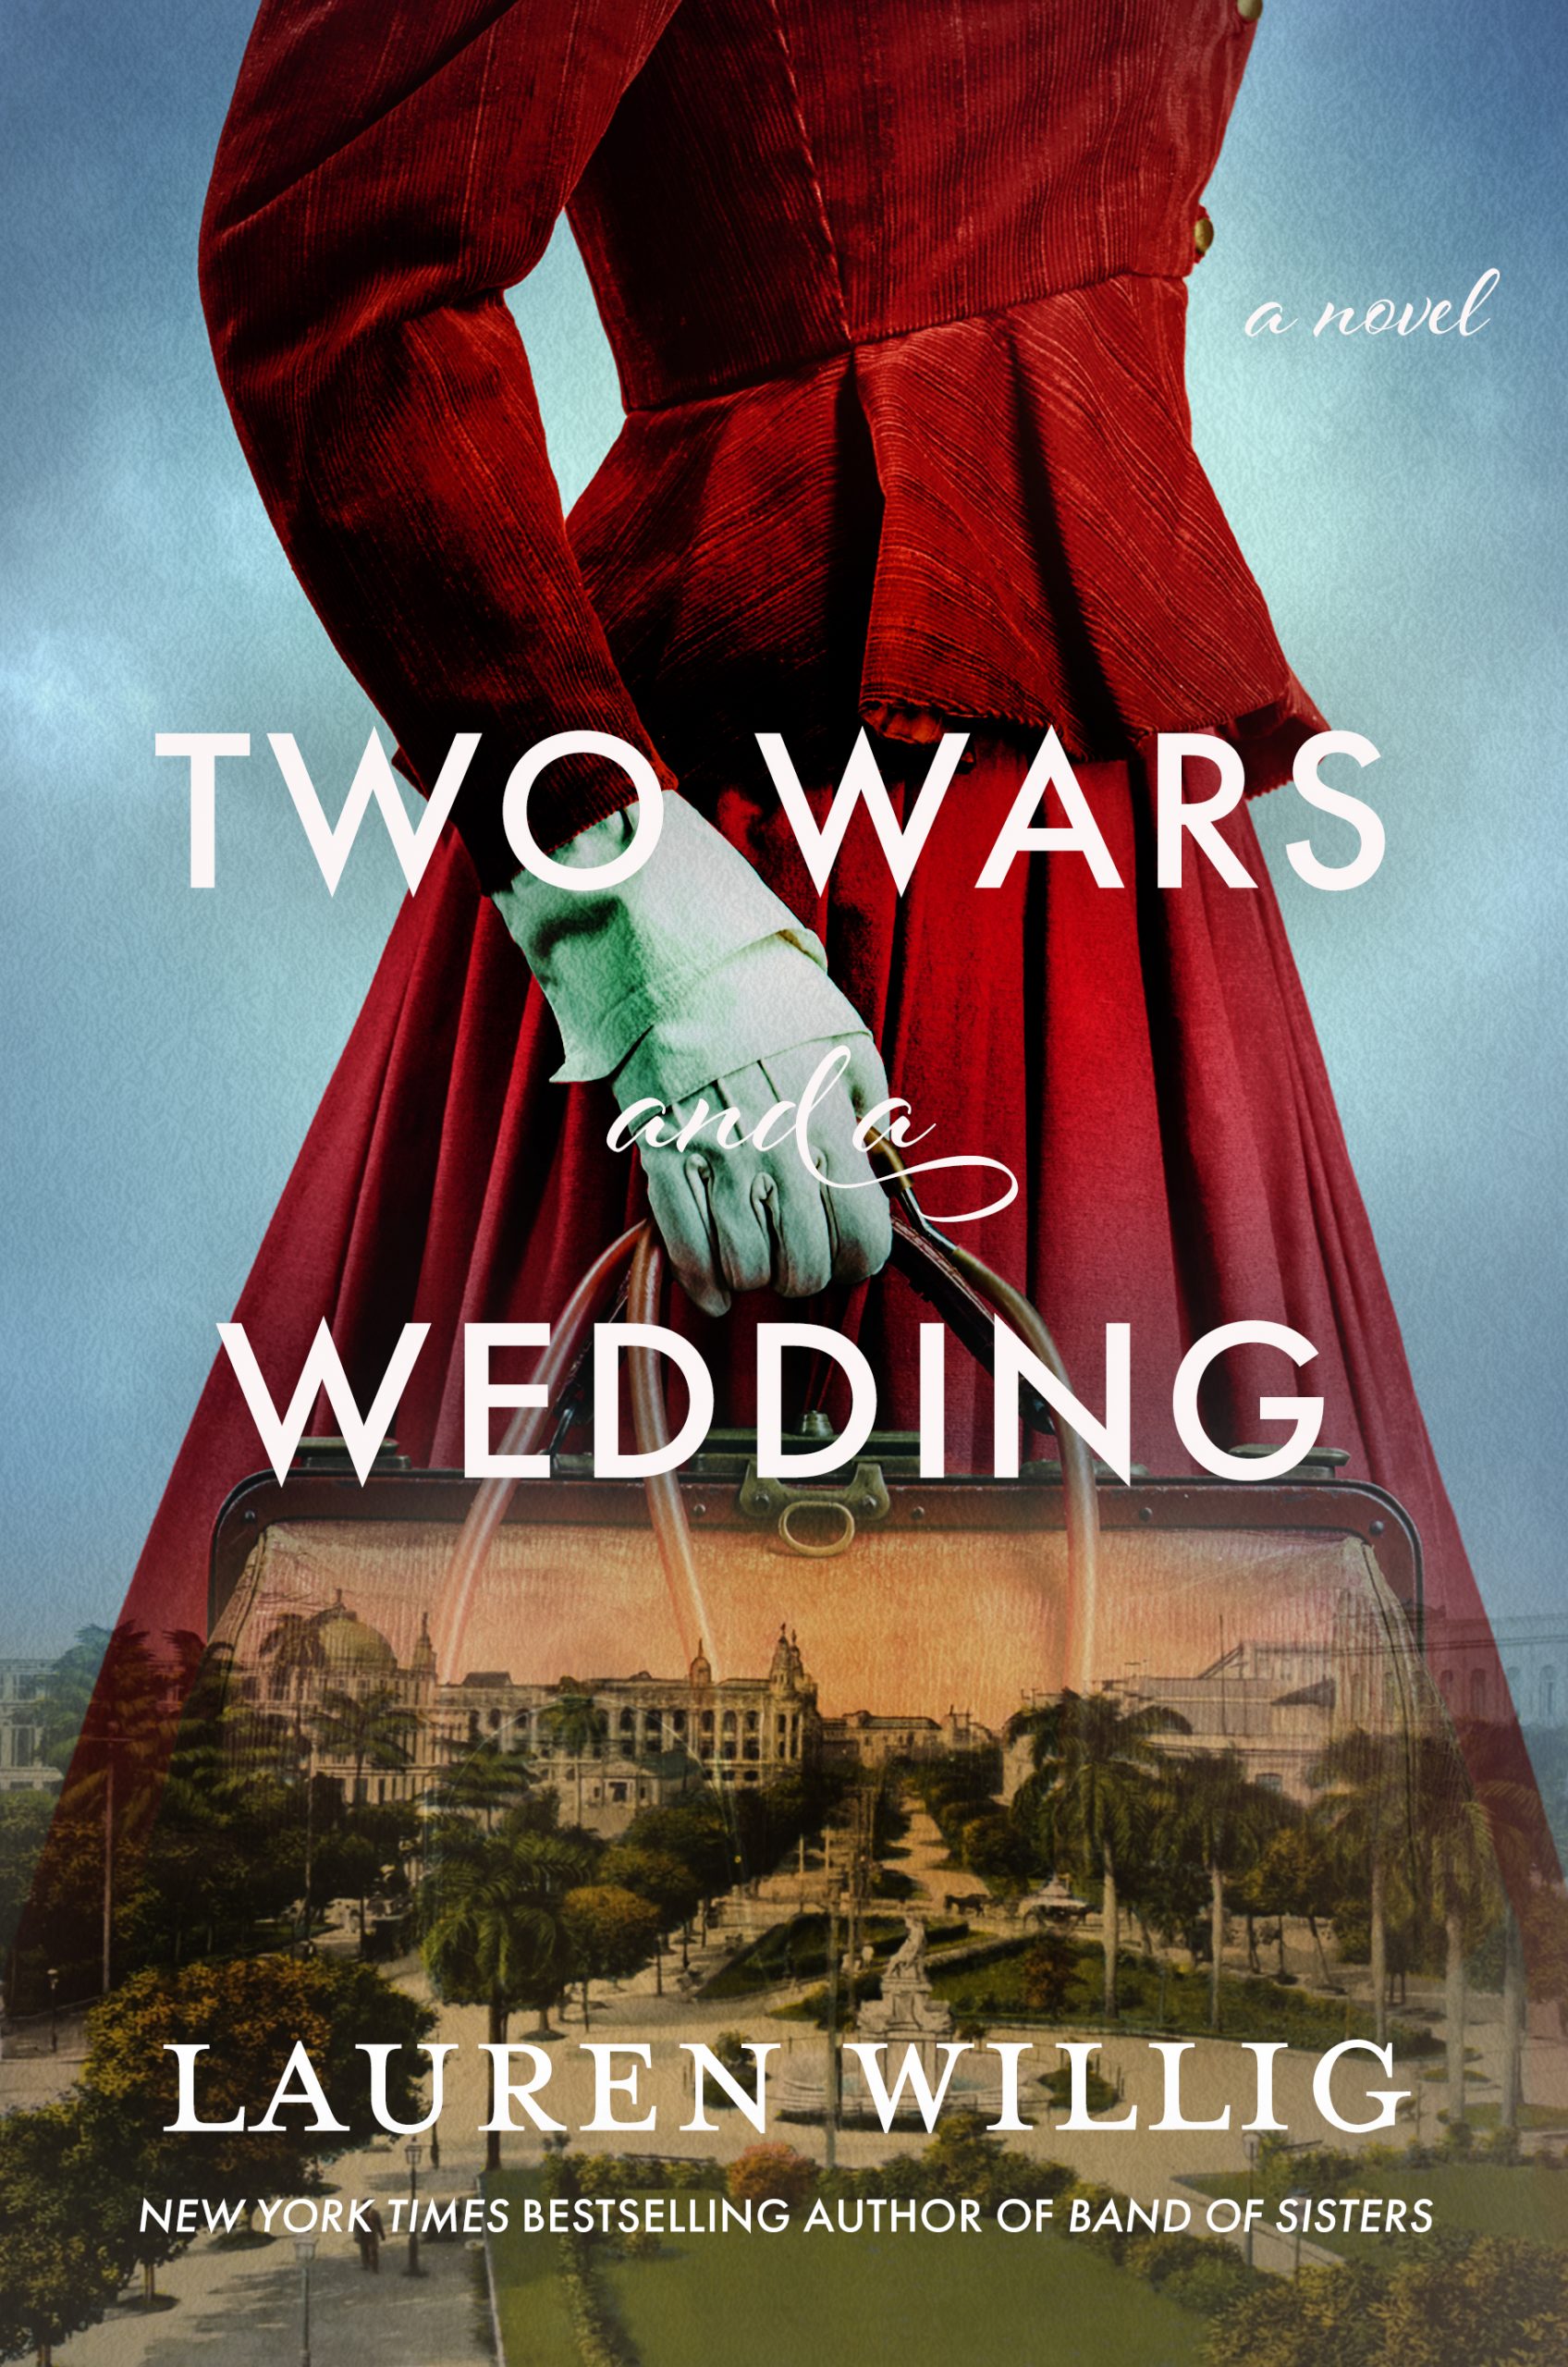 Two Wars and a Wedding by Lauren Willig